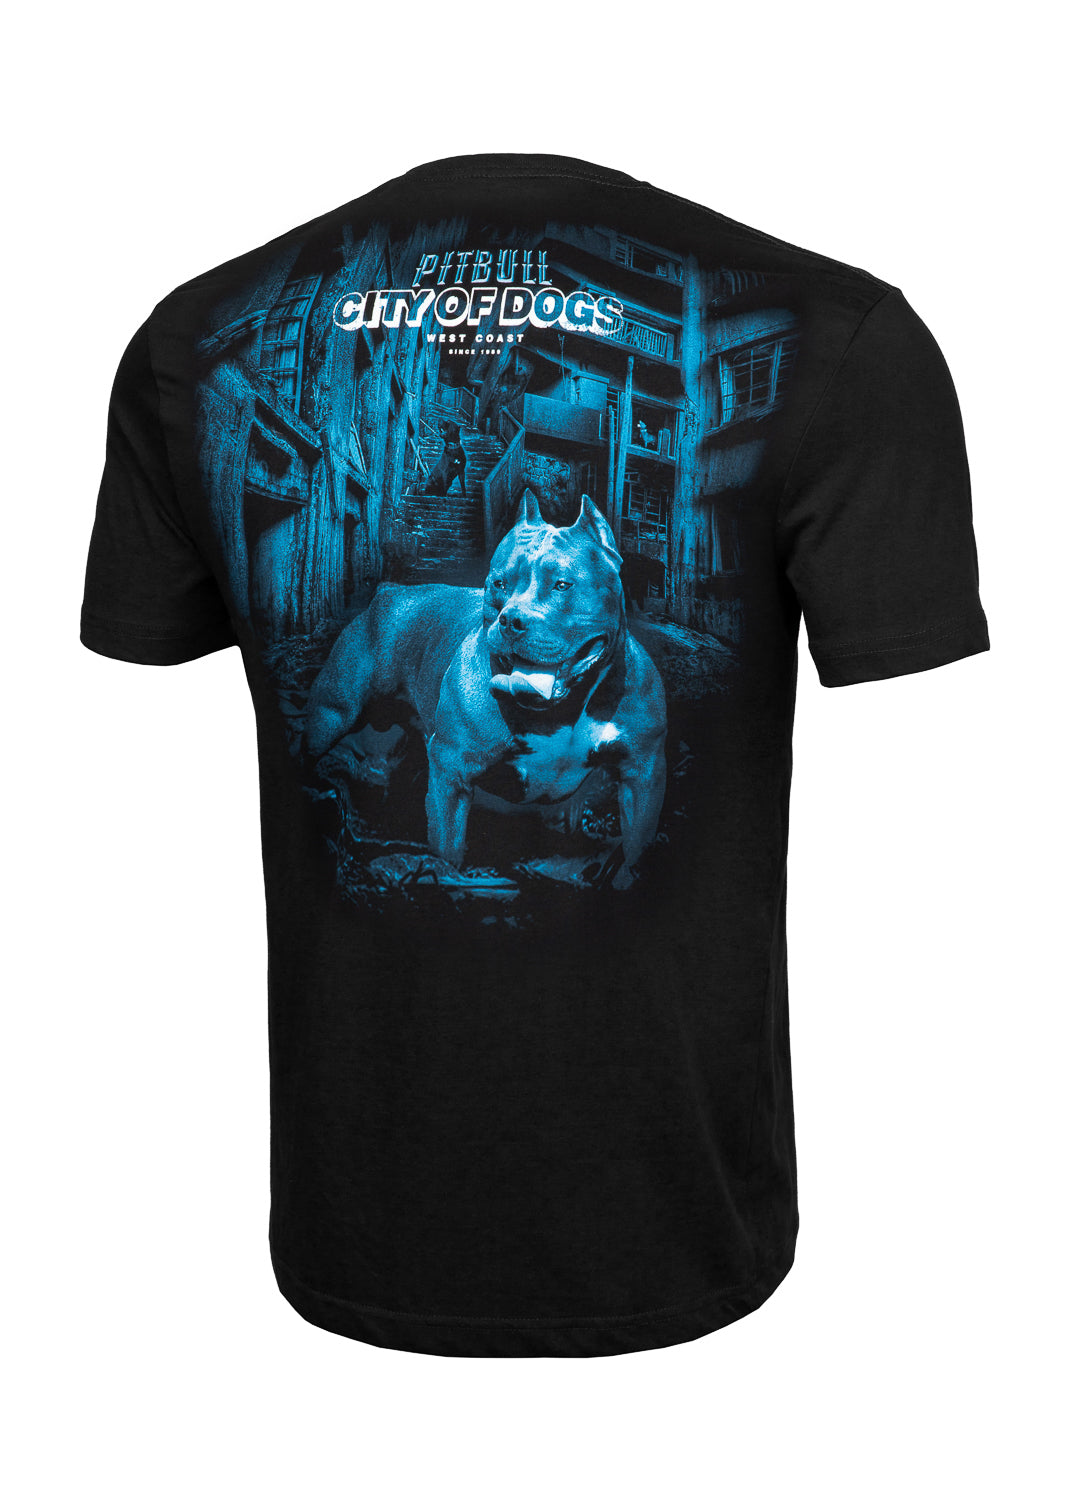 CITY OF DOGS T-SHIRT BLACK